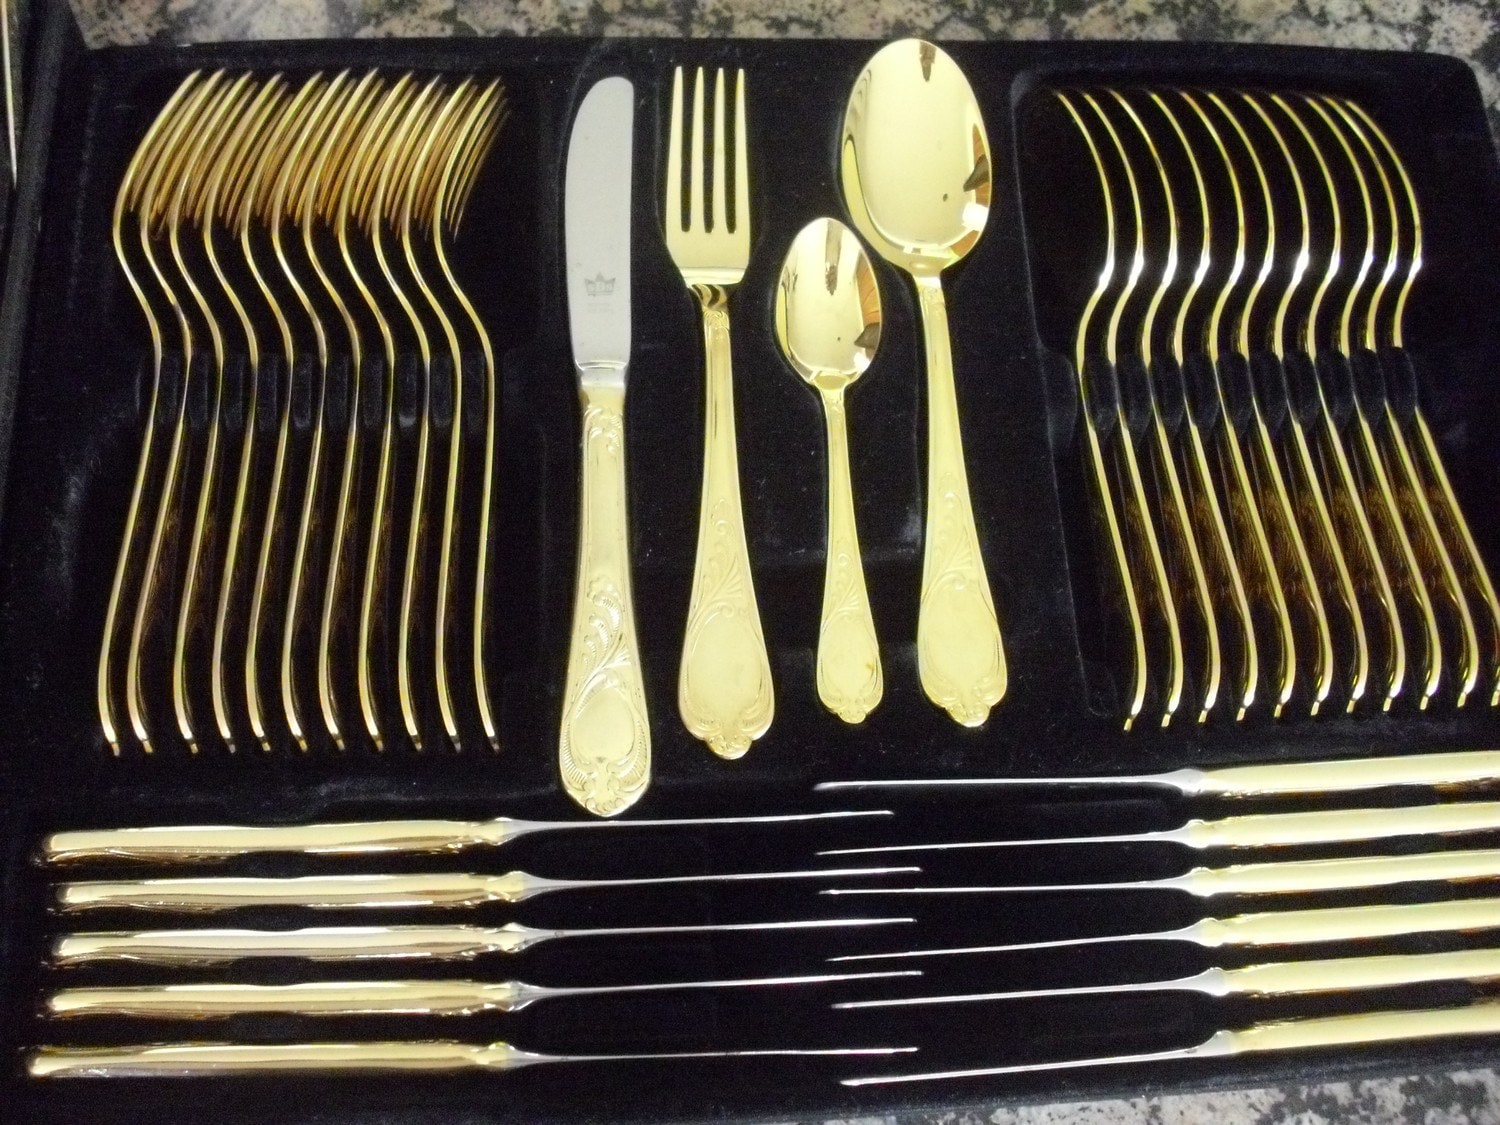 What are some retailers that sell gold-plated flatware?